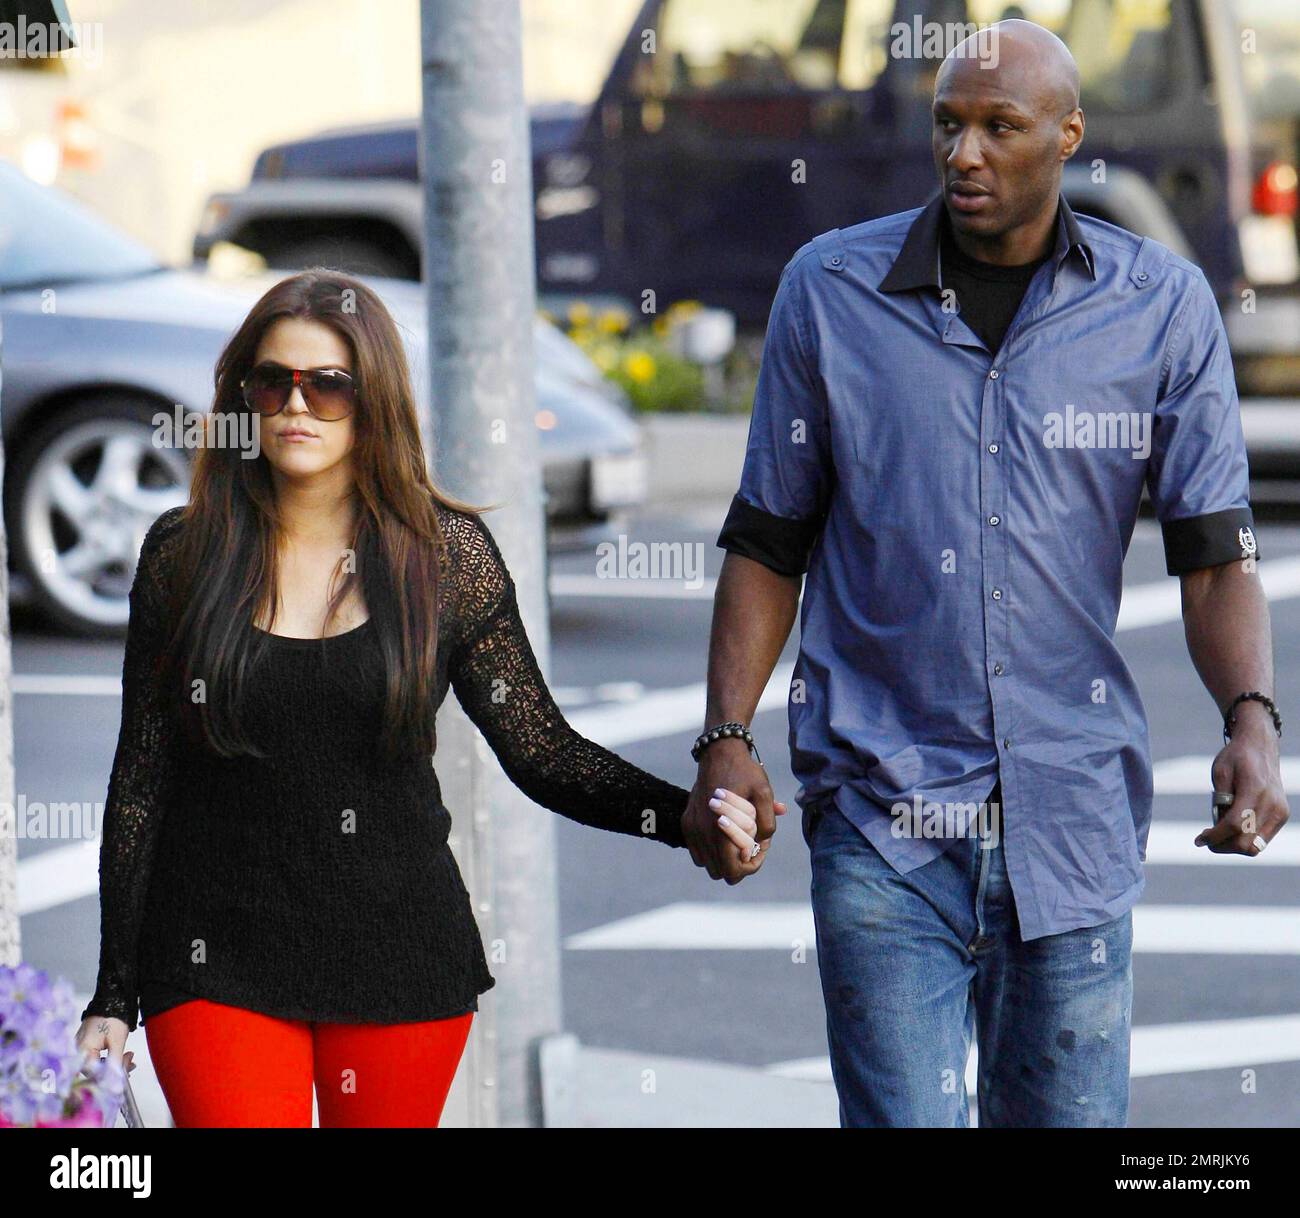 In a pair of bright red leggings, a black crochet top and fuzzy-lined high heel platform buckle-detailed boots reality TV star Khloe Kardashian holds hands with husband, LA Lakers basketball player Lamar Odom, as they stroll down the street.  The couple's new E! Network reality show 'Khloe & Lamar' premieres on April 10th and Khloe recently said of the premiere, 'I can't believe the premiere is less than a month away - so excited and so nervous! I'm dying with anticipation.' Los Angeles, CA. 03/15/11. Stock Photo